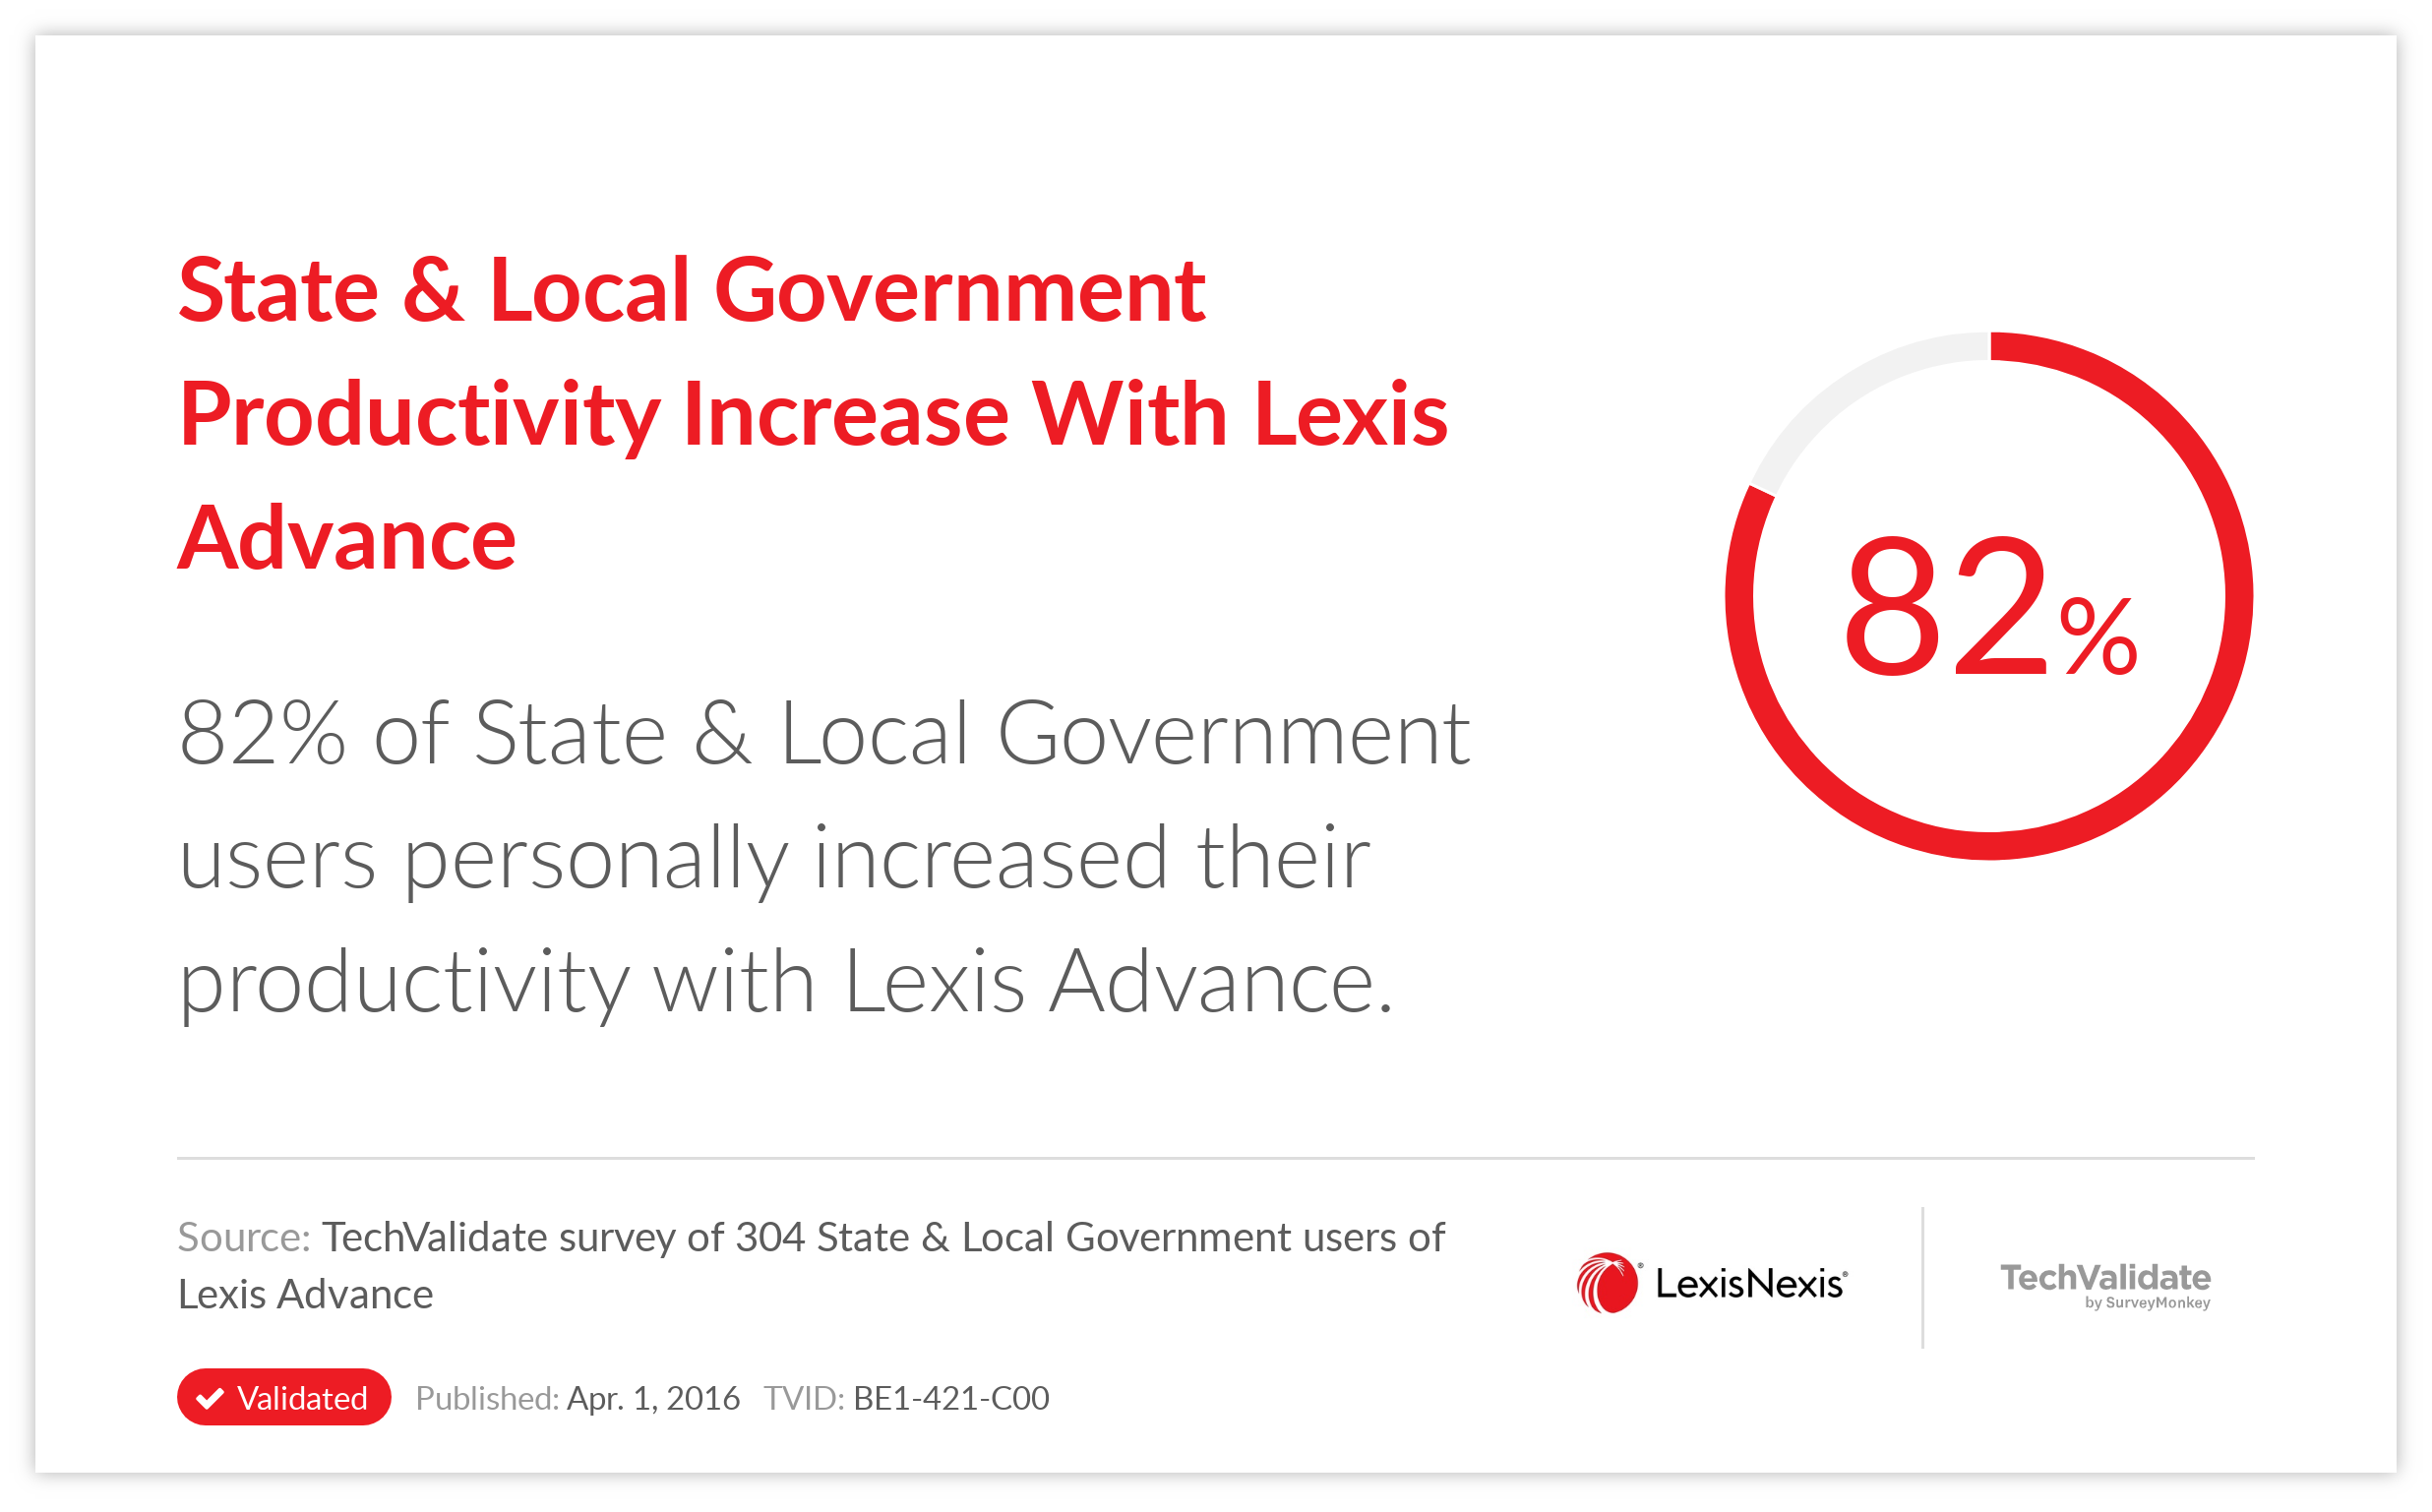 State & Local Government Productivity Increase With Lexis Advance